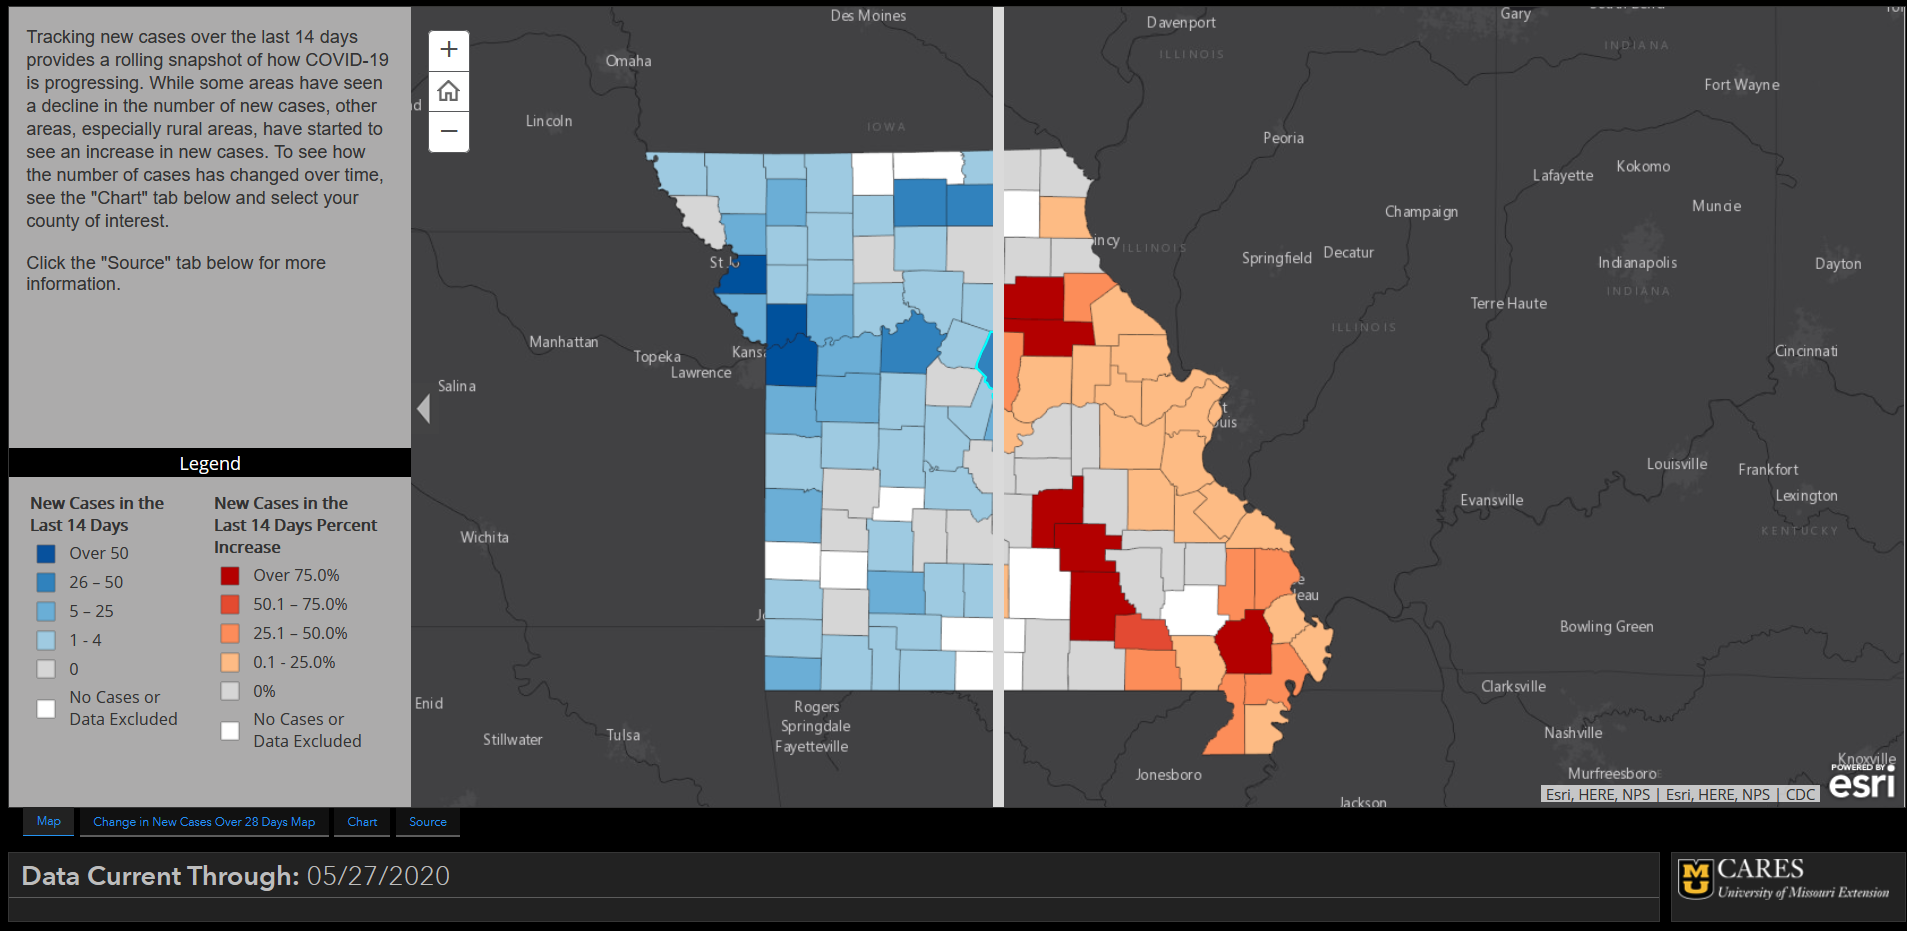 Open Screenshot of swipe map showing new COVID-19 cases in Missouri over the past 14 days.